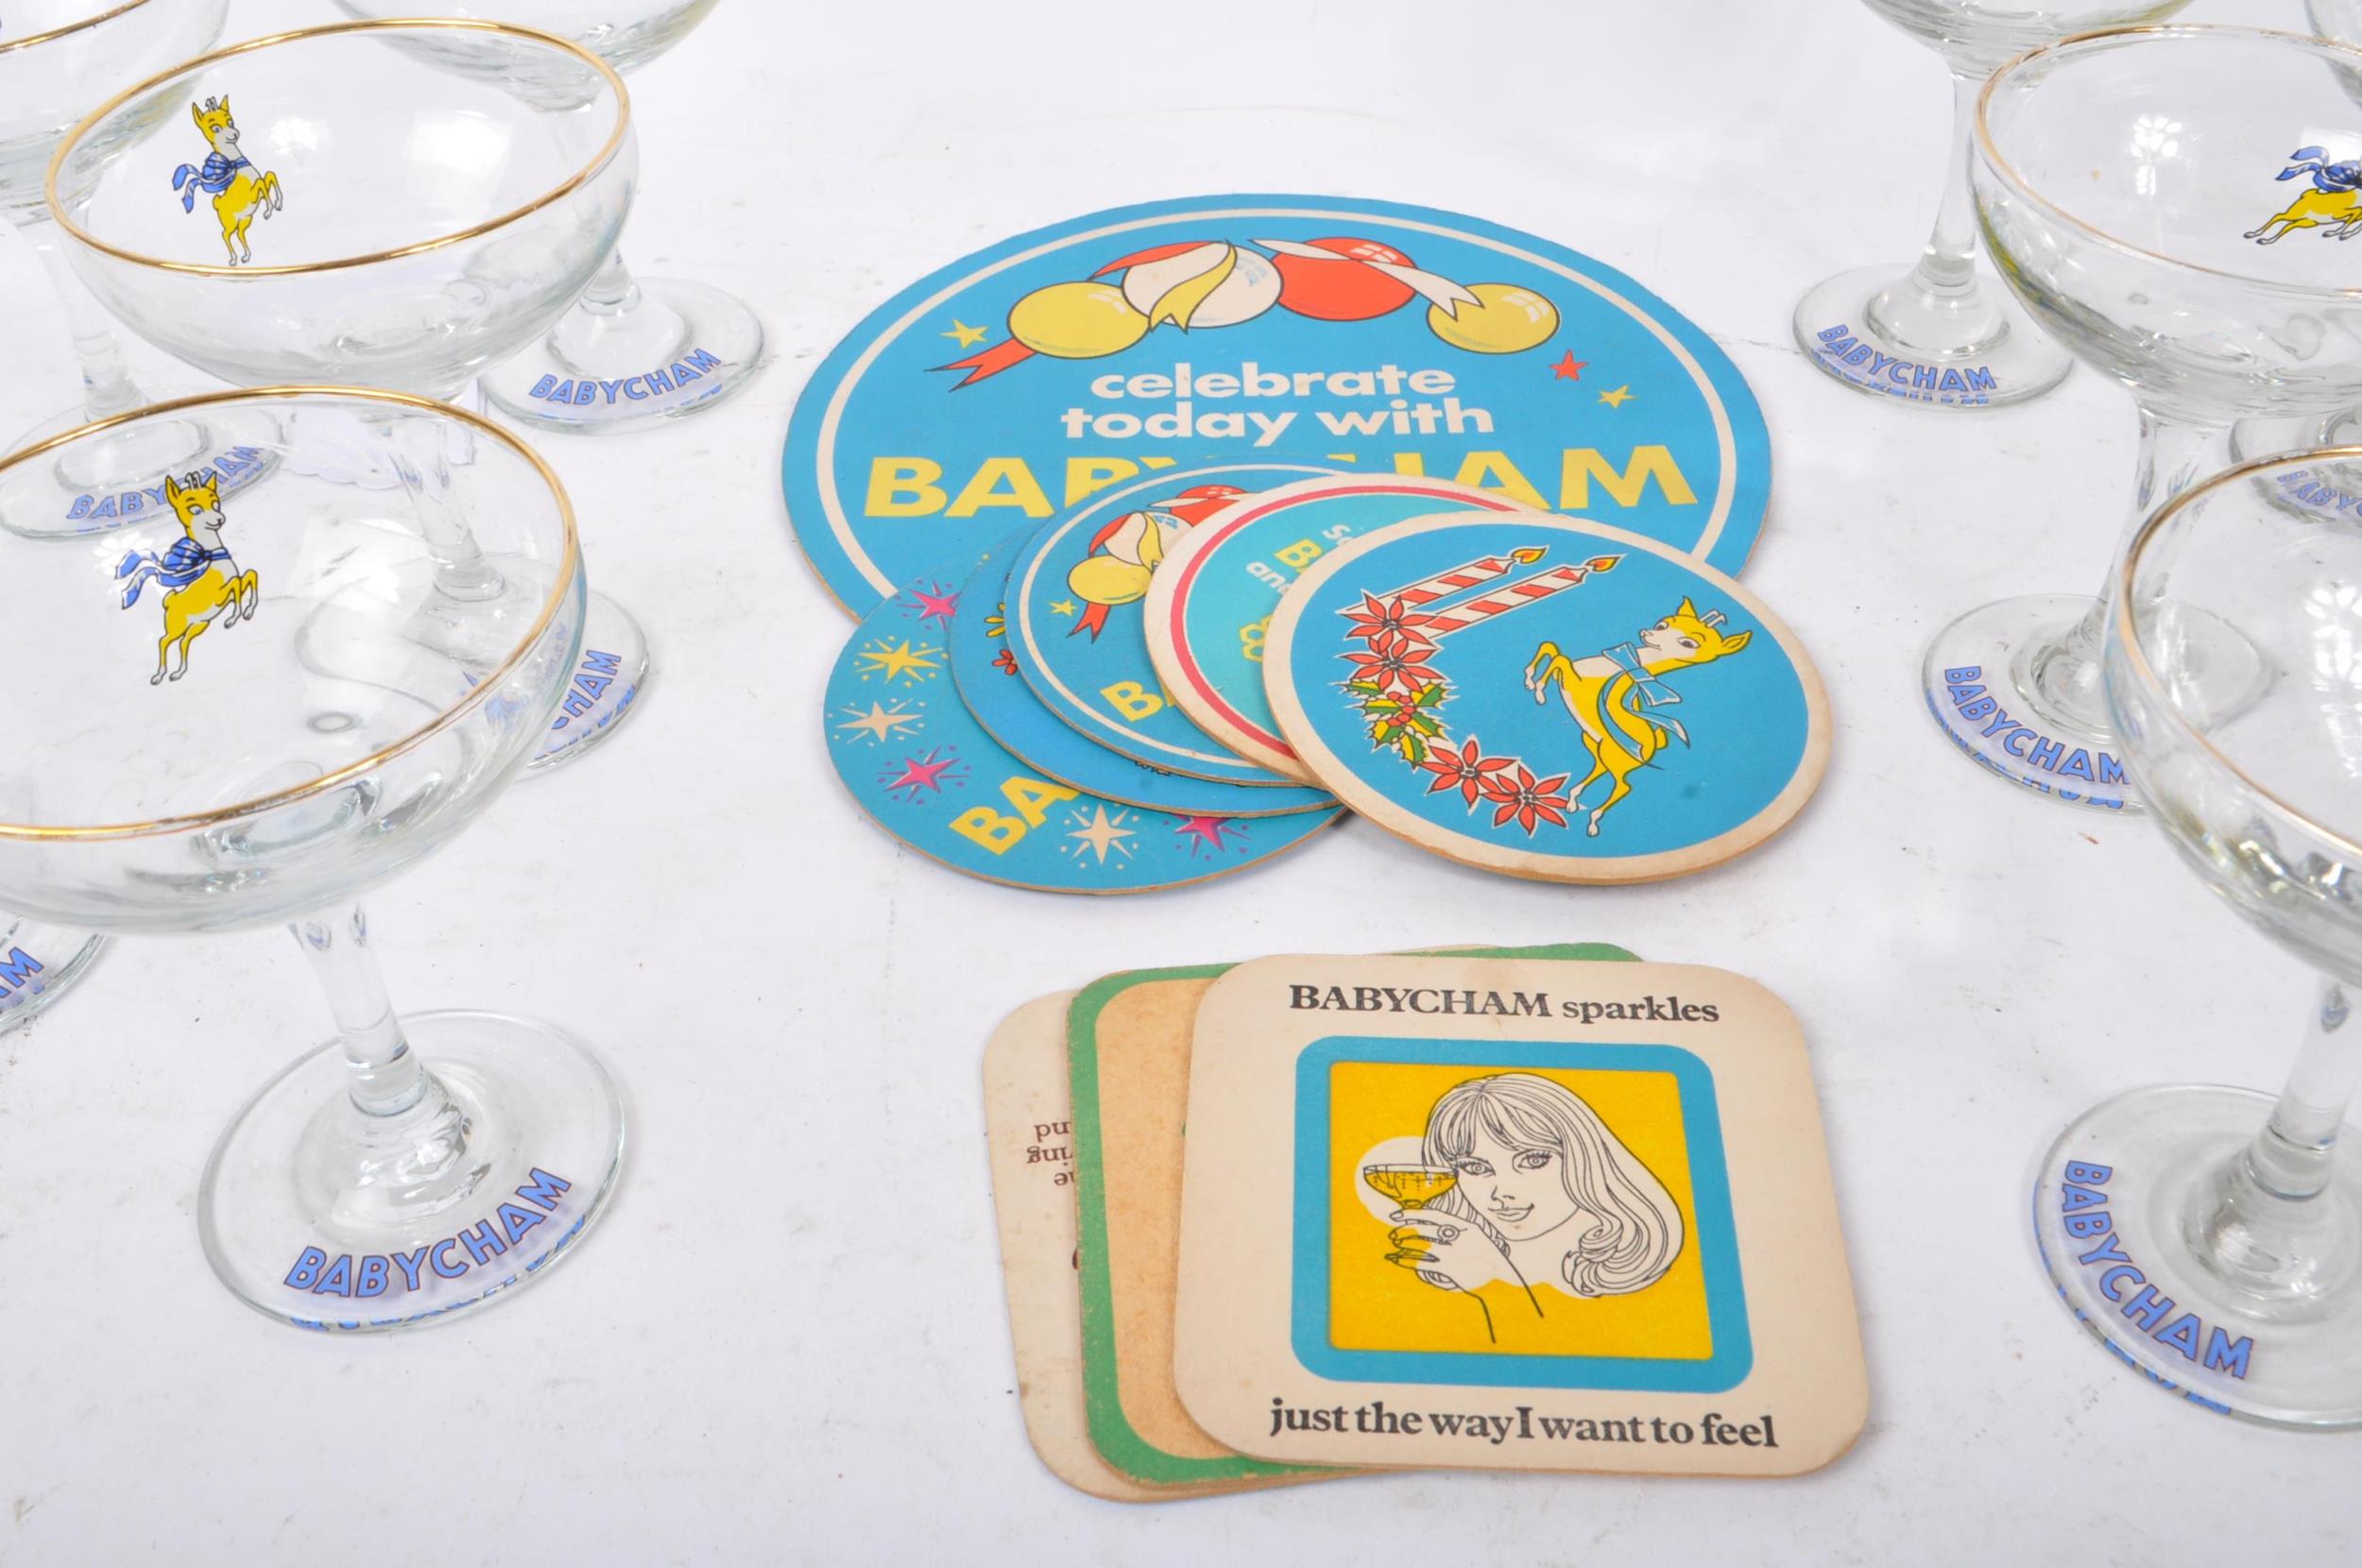 BABYCHAM - COLLECTION OF BRANDED DRINKING GLASSES - Image 4 of 7